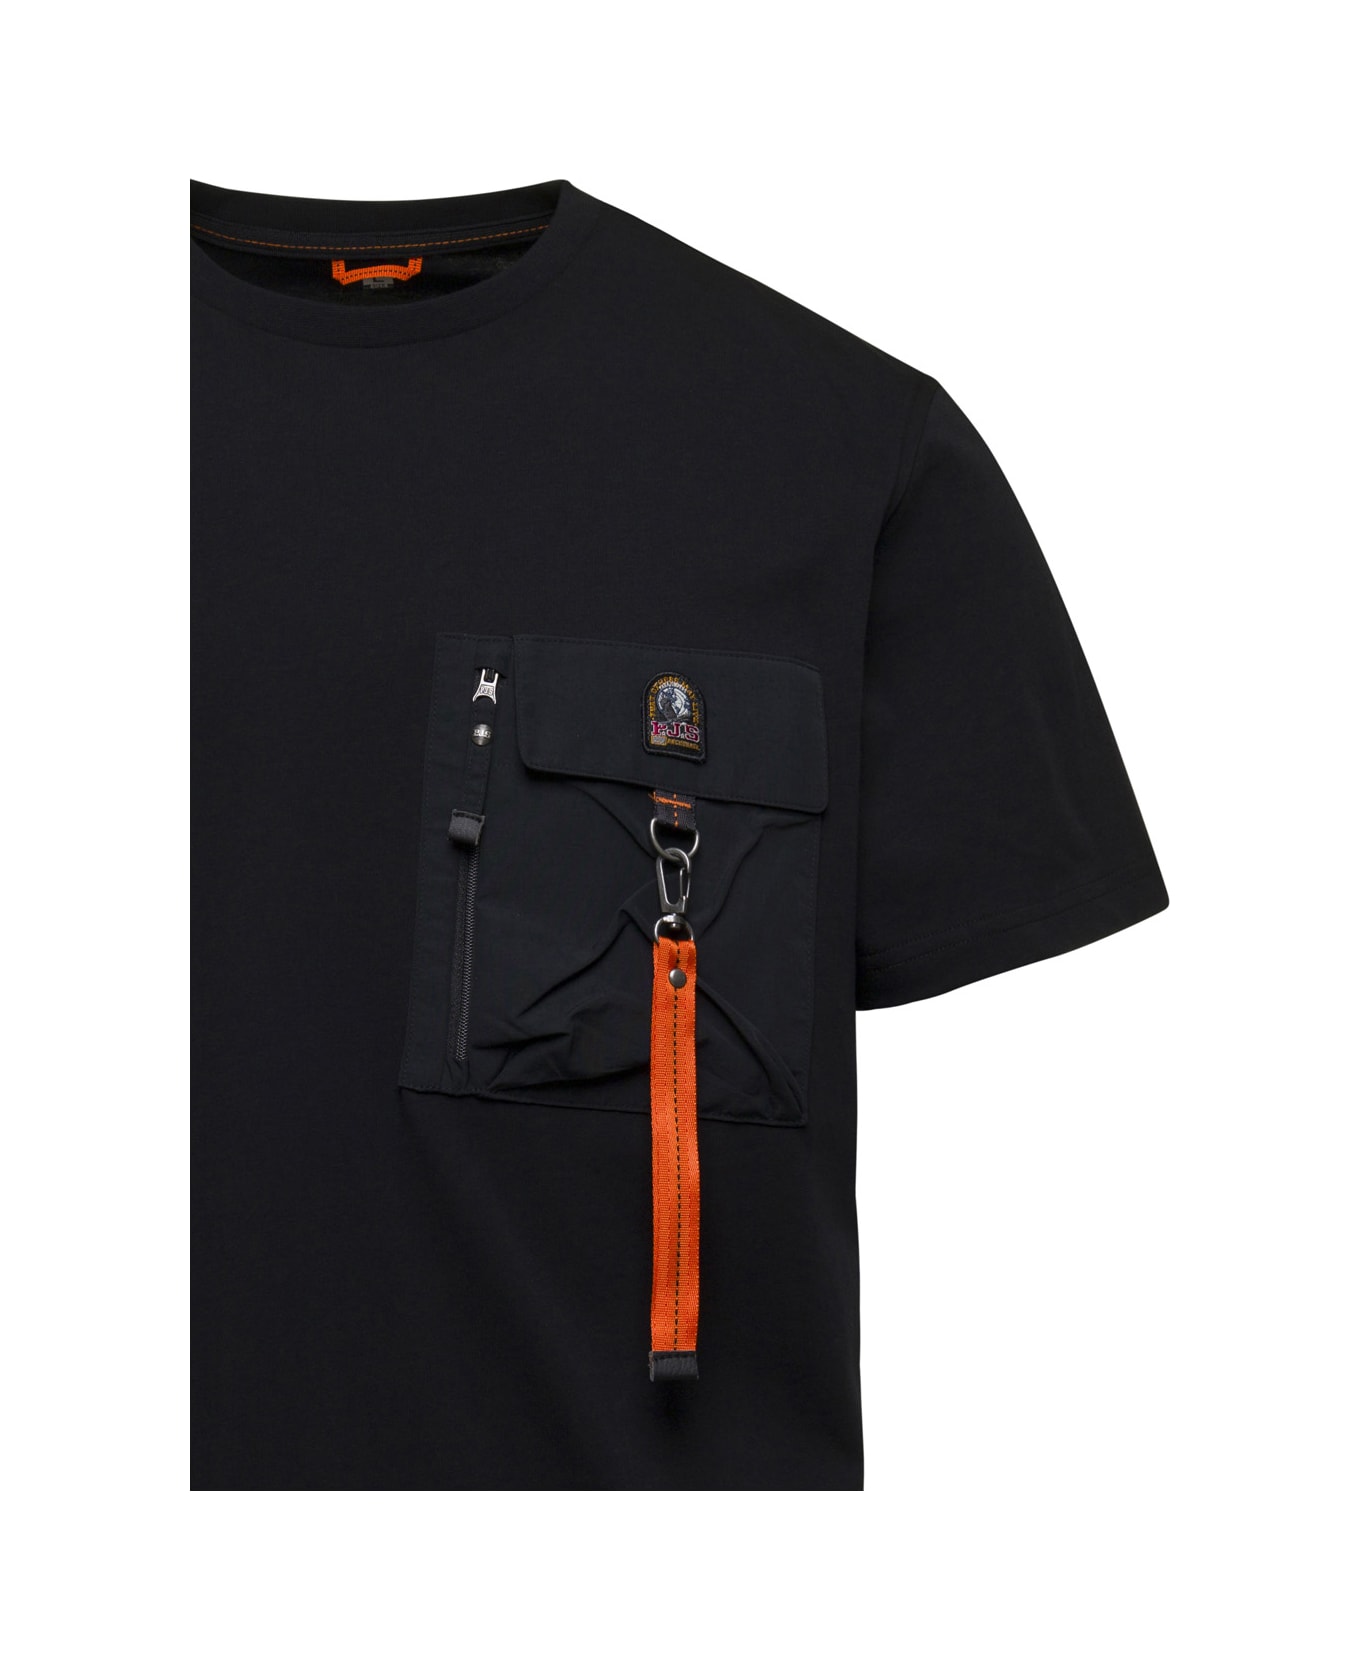 Parajumpers Black T-shirt With Patch Pocket And Zip In Cotton Man - Black シャツ